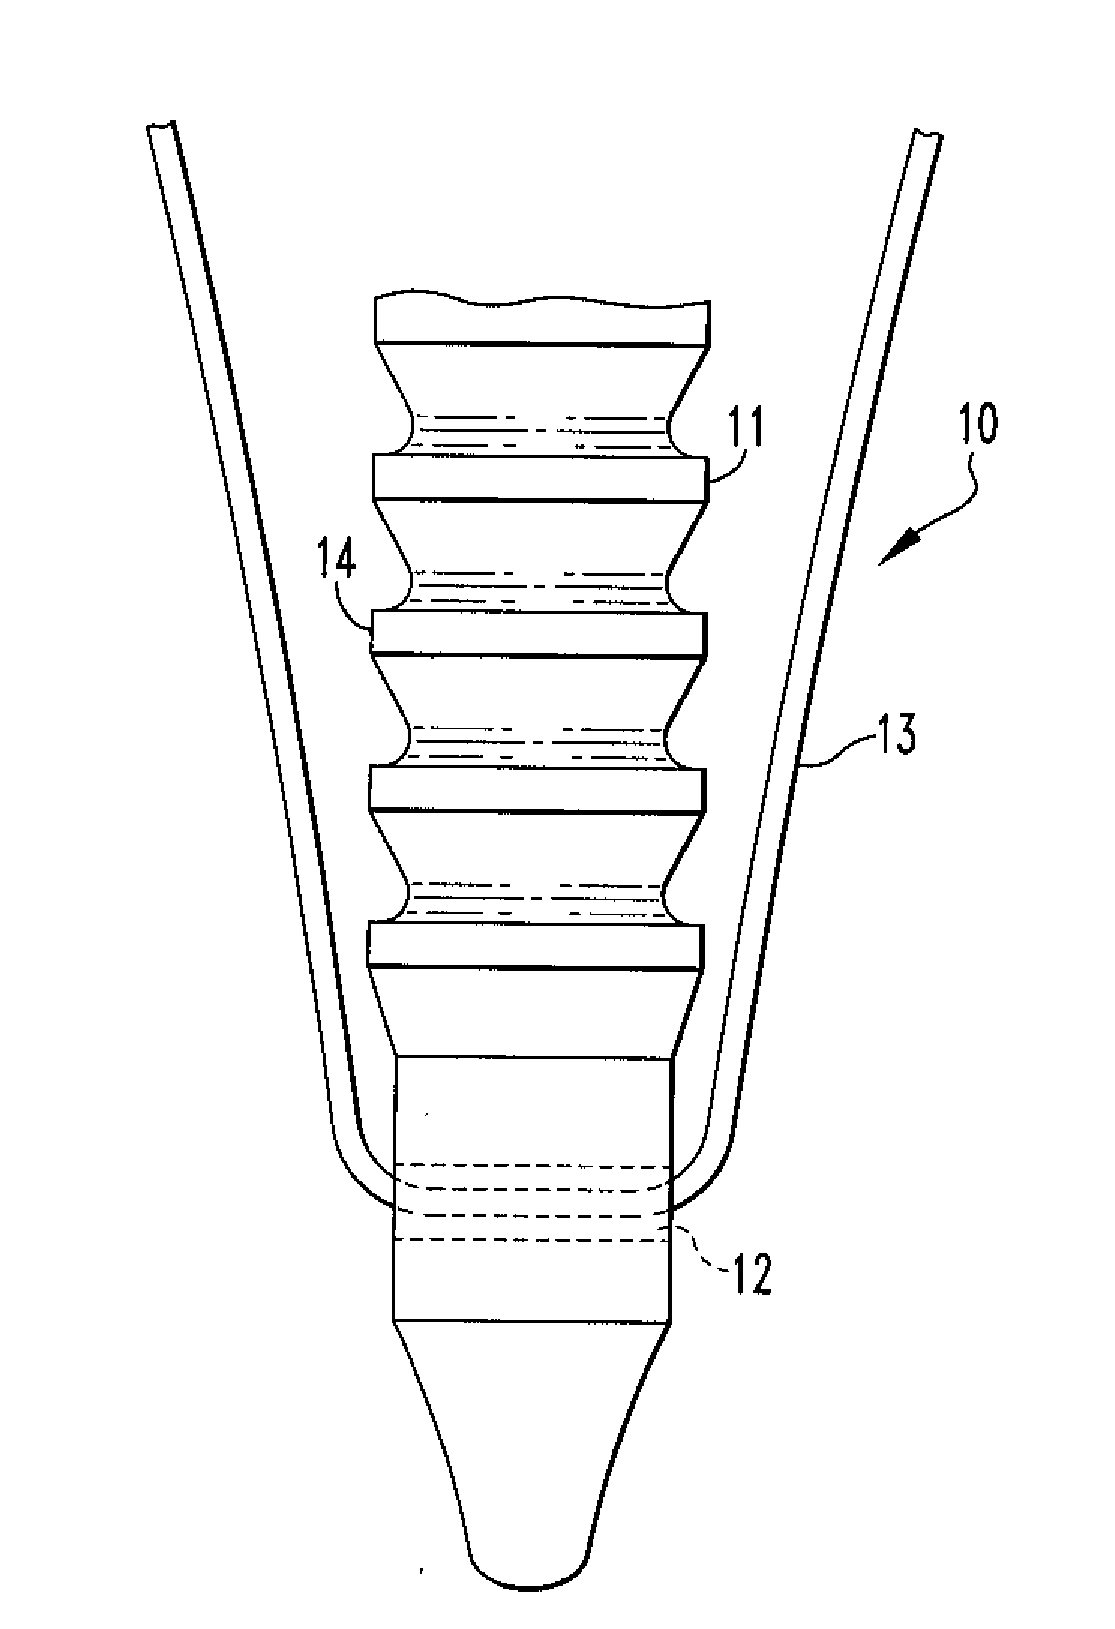 Fixation Devices and Method of Repair